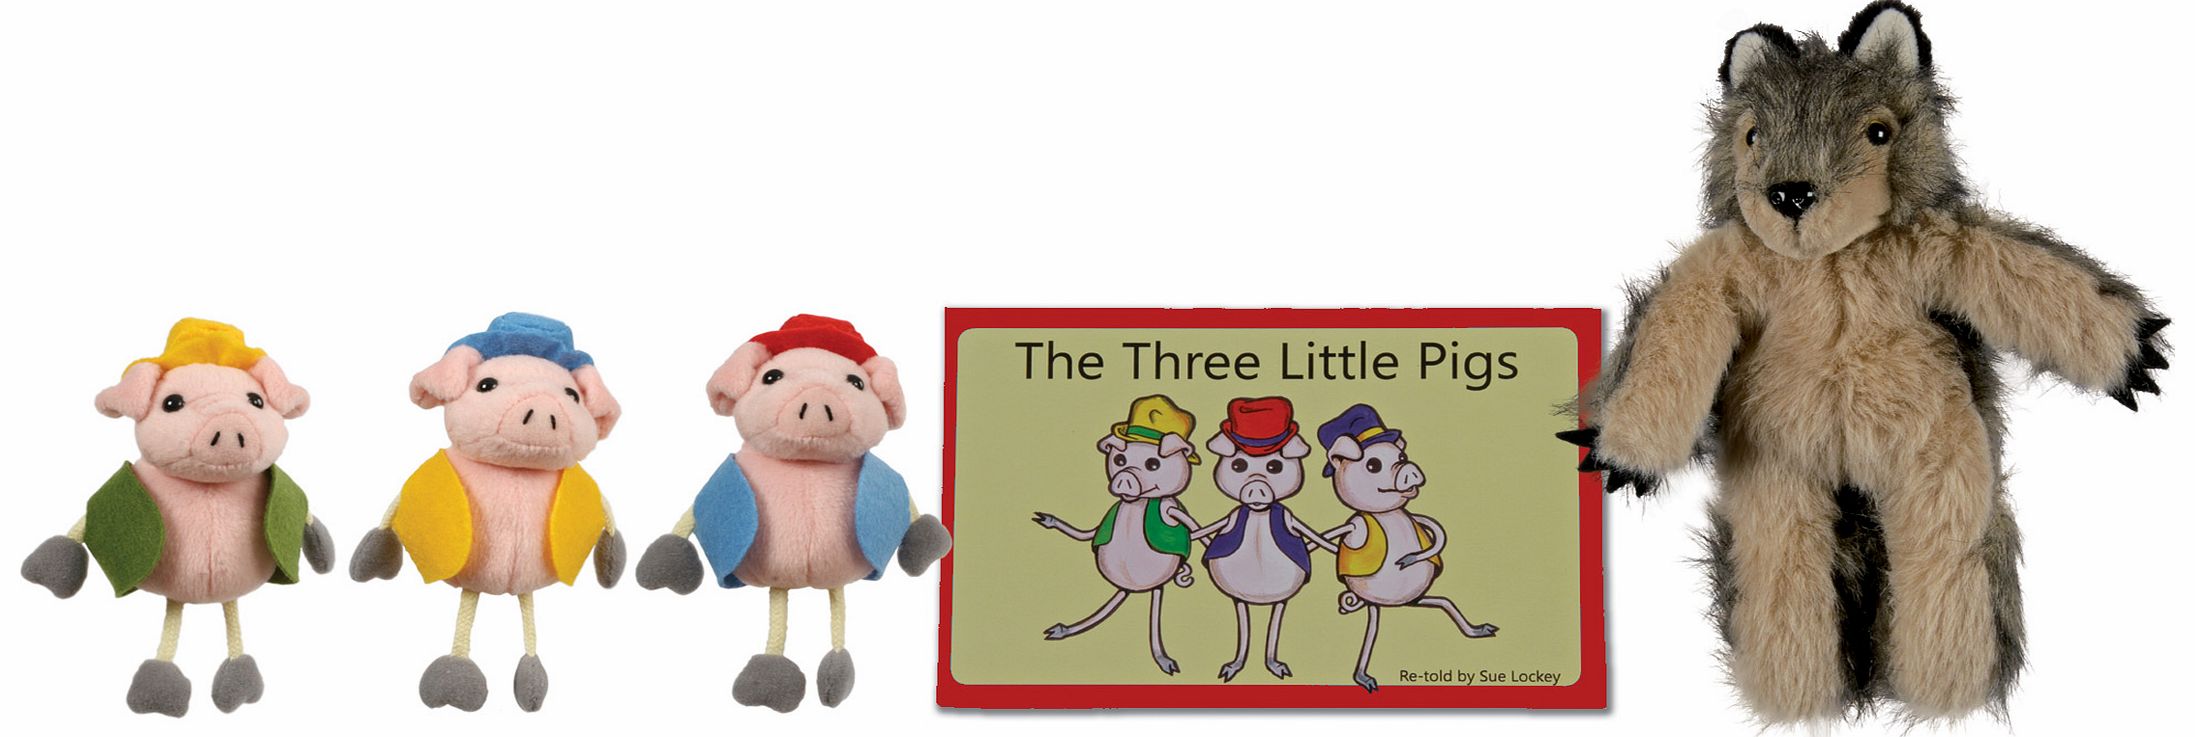 The Puppet Company Traditional Story Set - The Three Little Pigs